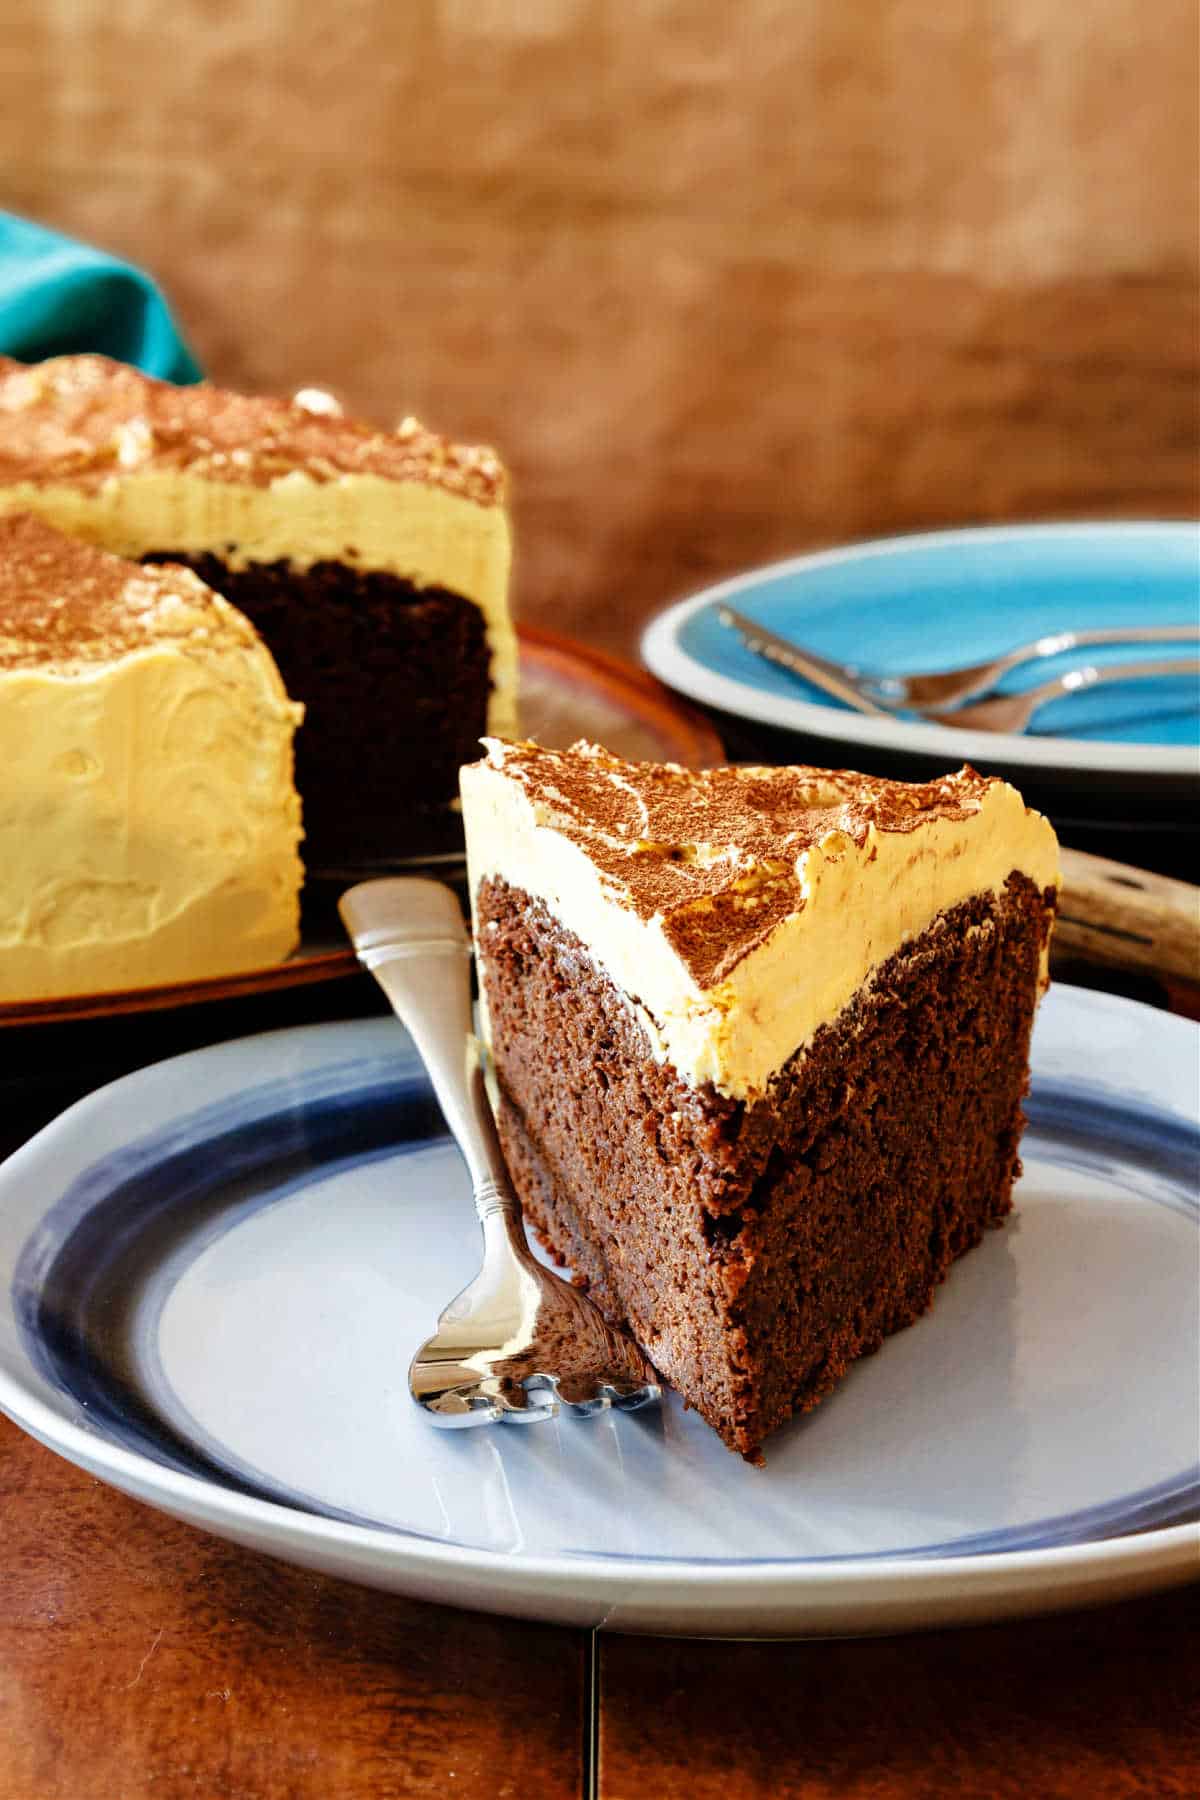 A slice of chocolate stout cake with a thick layer of caramel frosting on a blue plate.